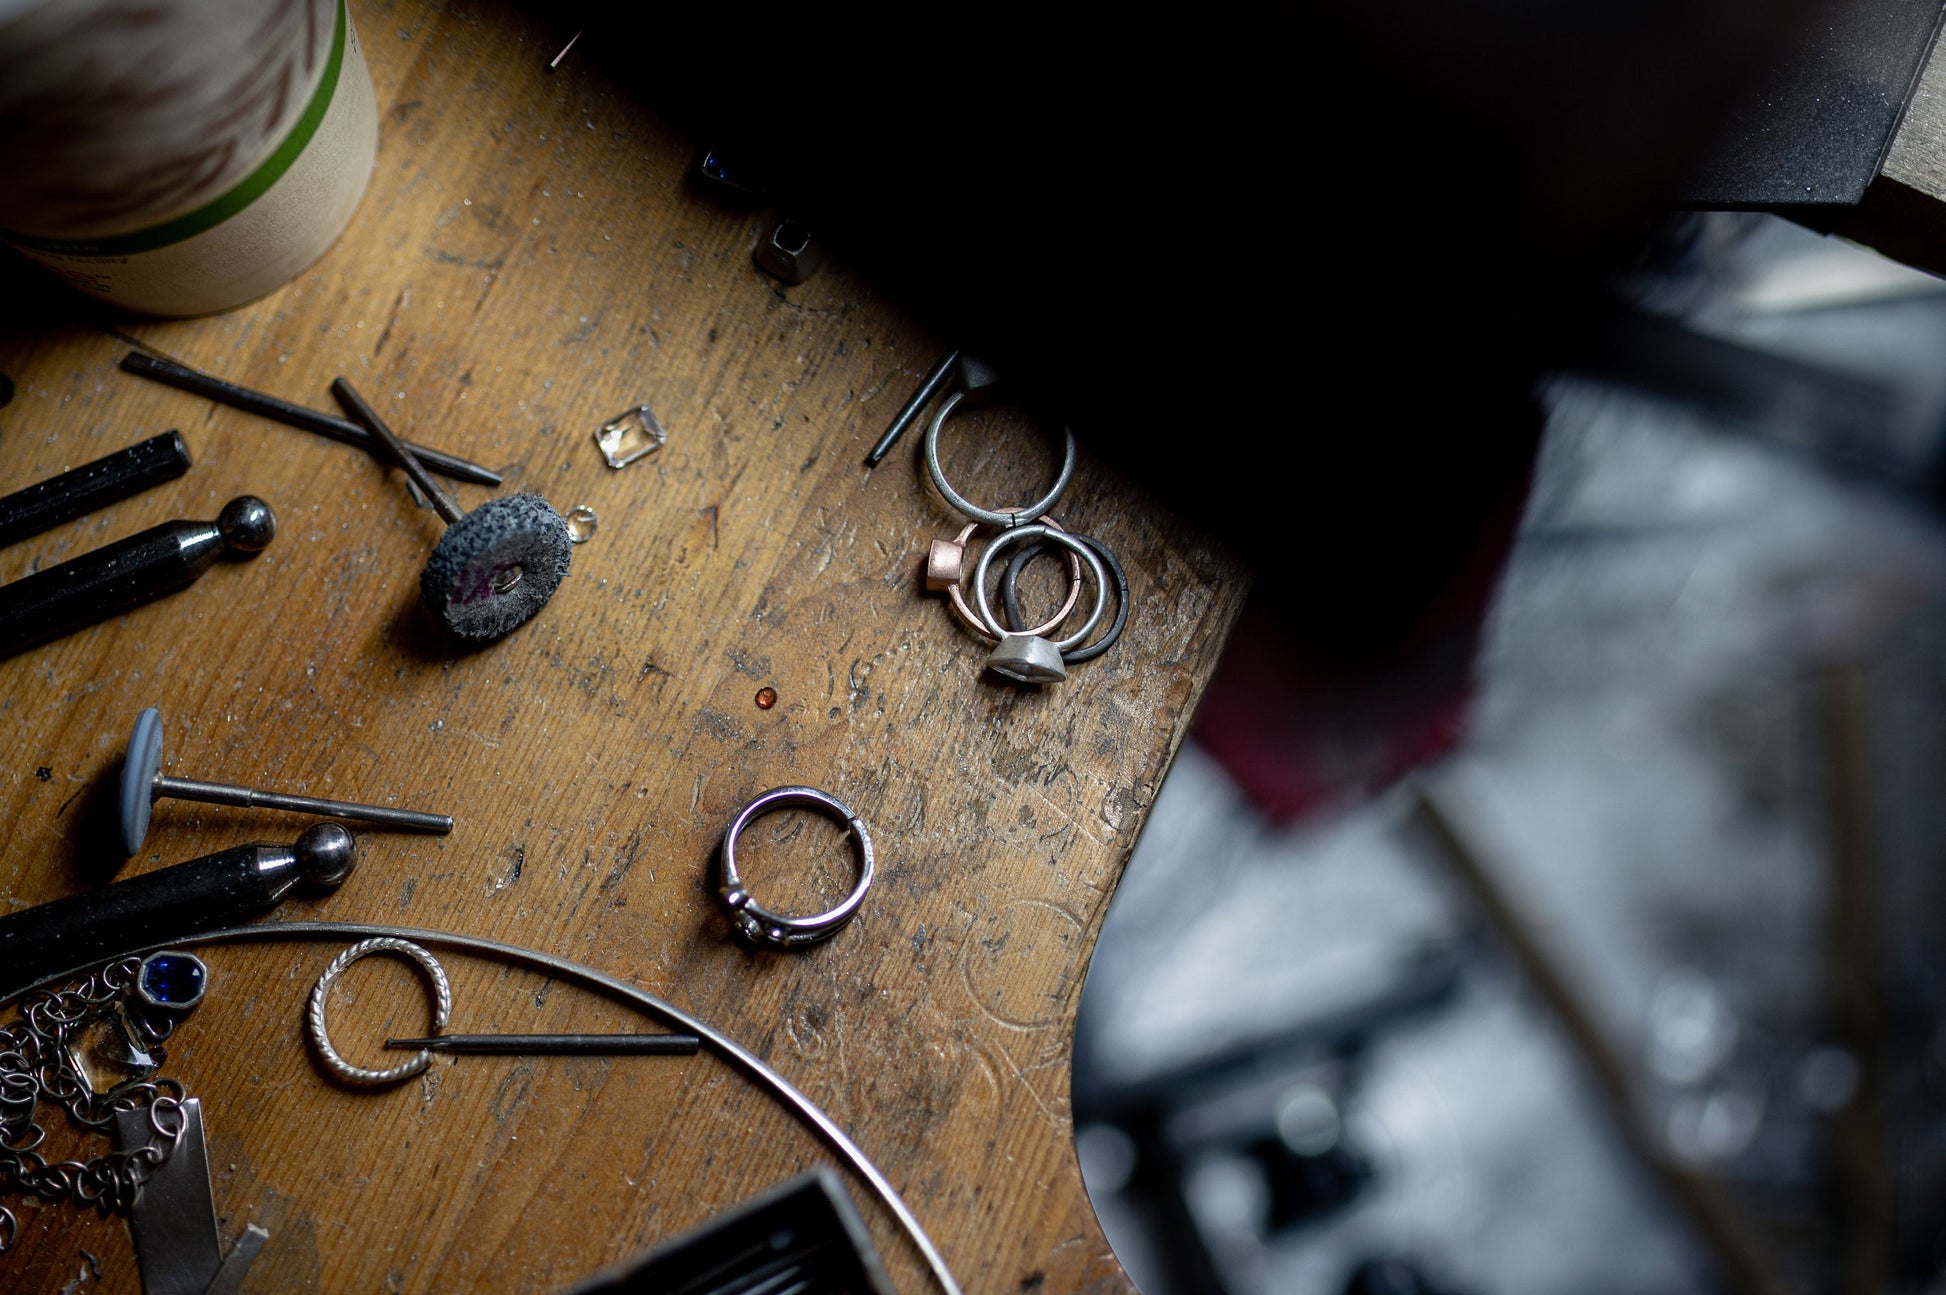 A bunch of handmade jewelry and tools on a table.